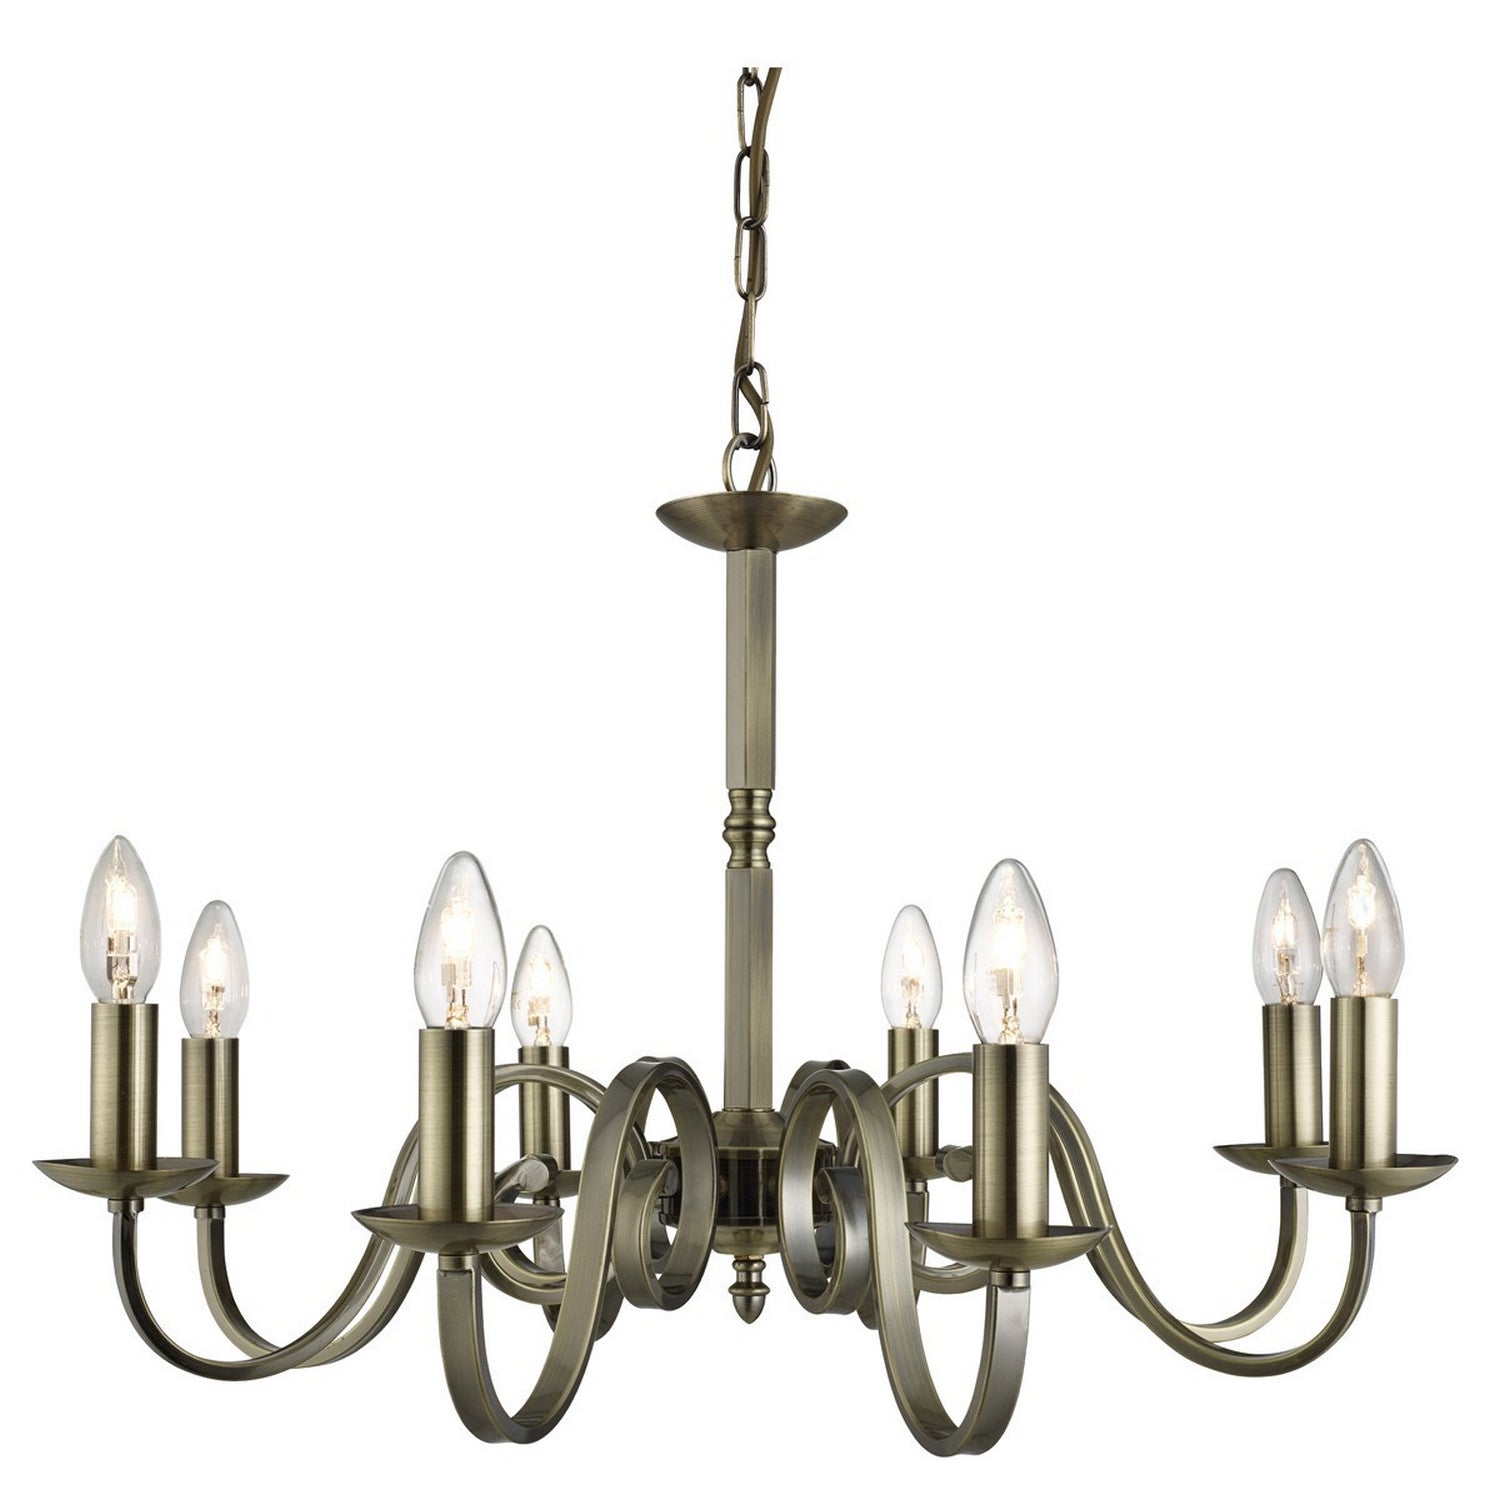 Richmond Antique Brass 8 Light Chandelier with Candle Style Sconces